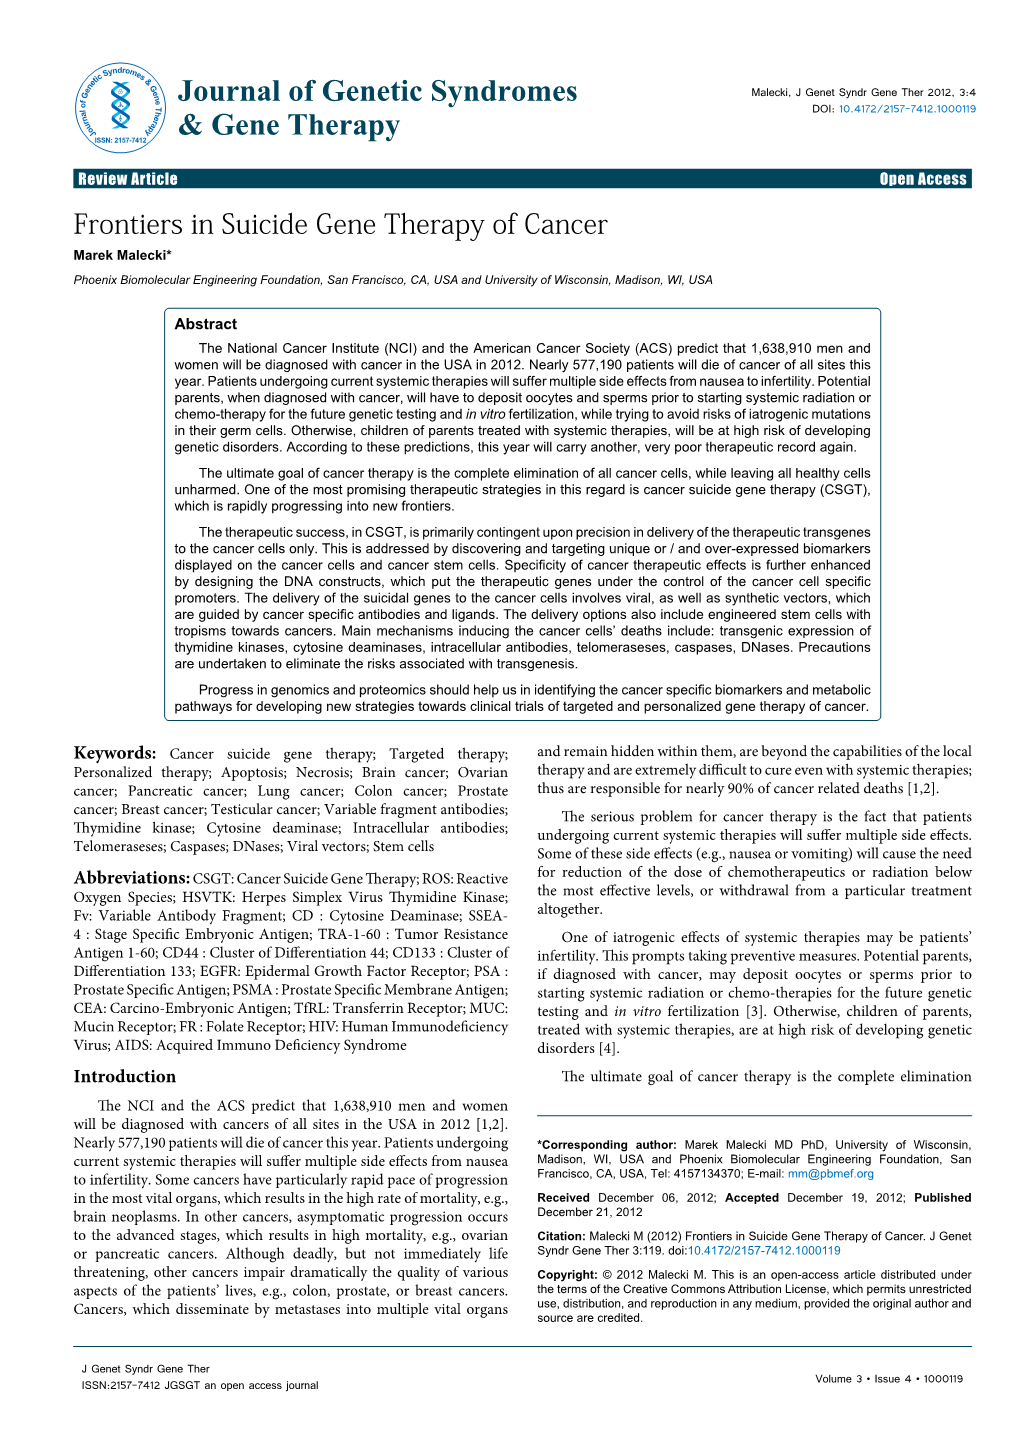 Frontiers in Suicide Gene Therapy of Cancer